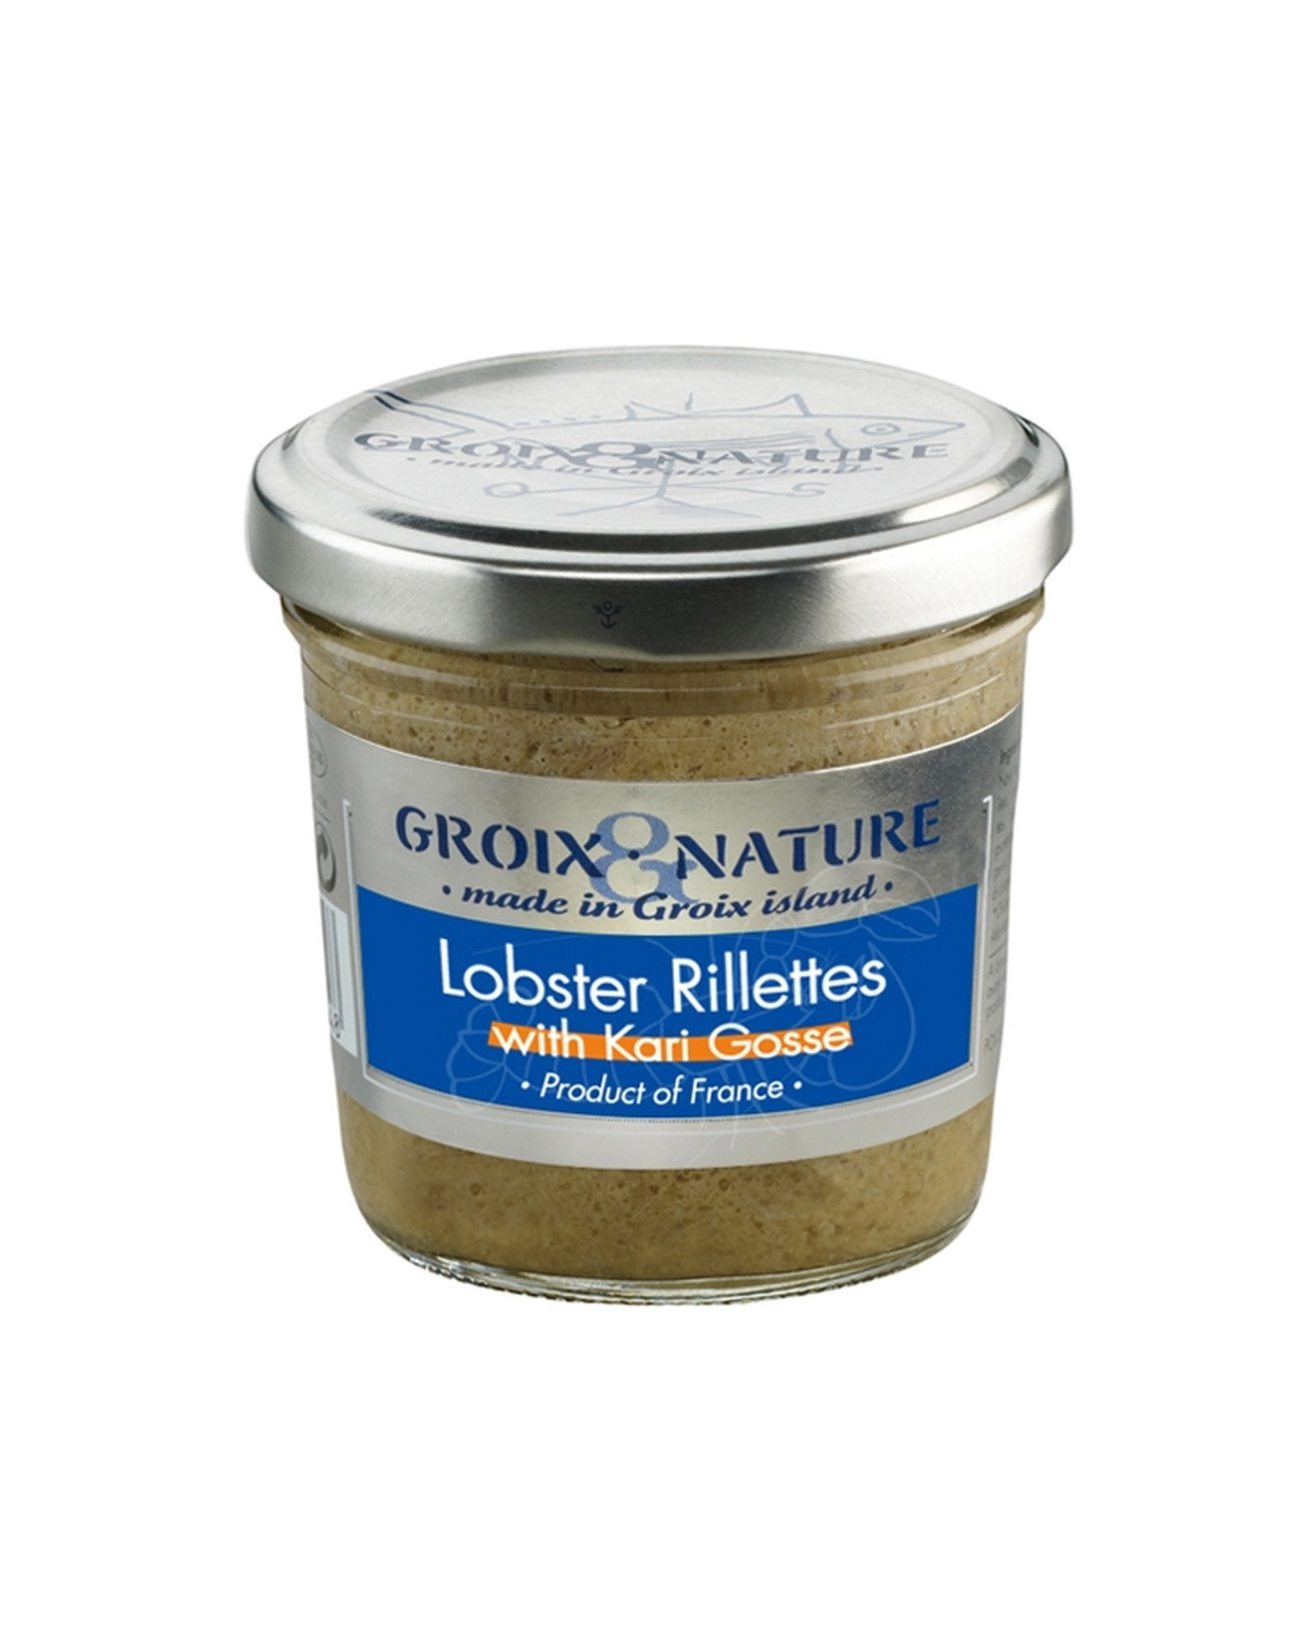 Can of Groix & Nature Lobster Rilletes with Kari Gosse